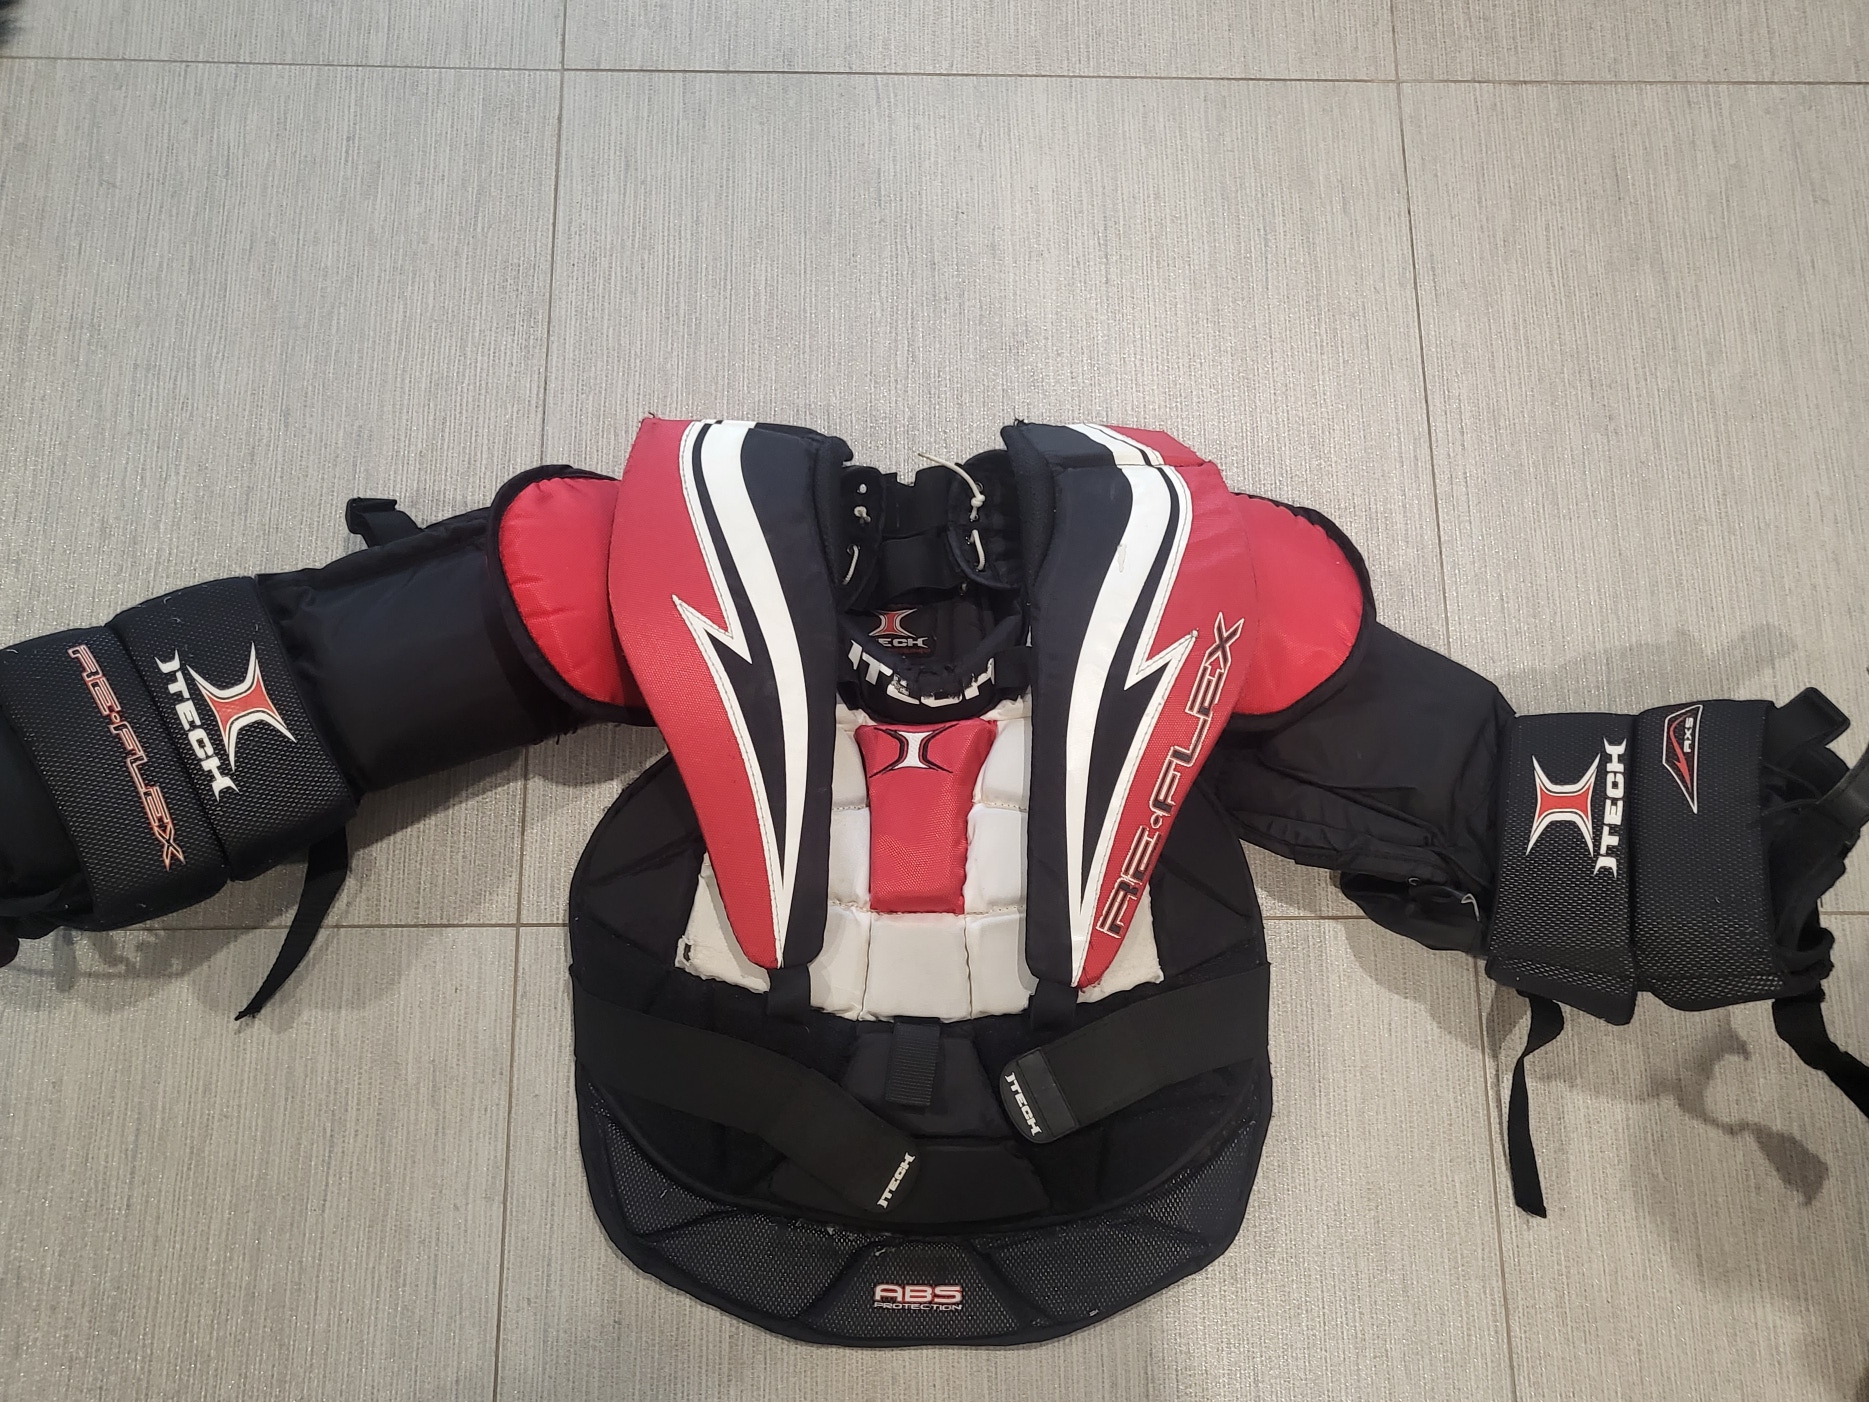 Used Itech chest protector